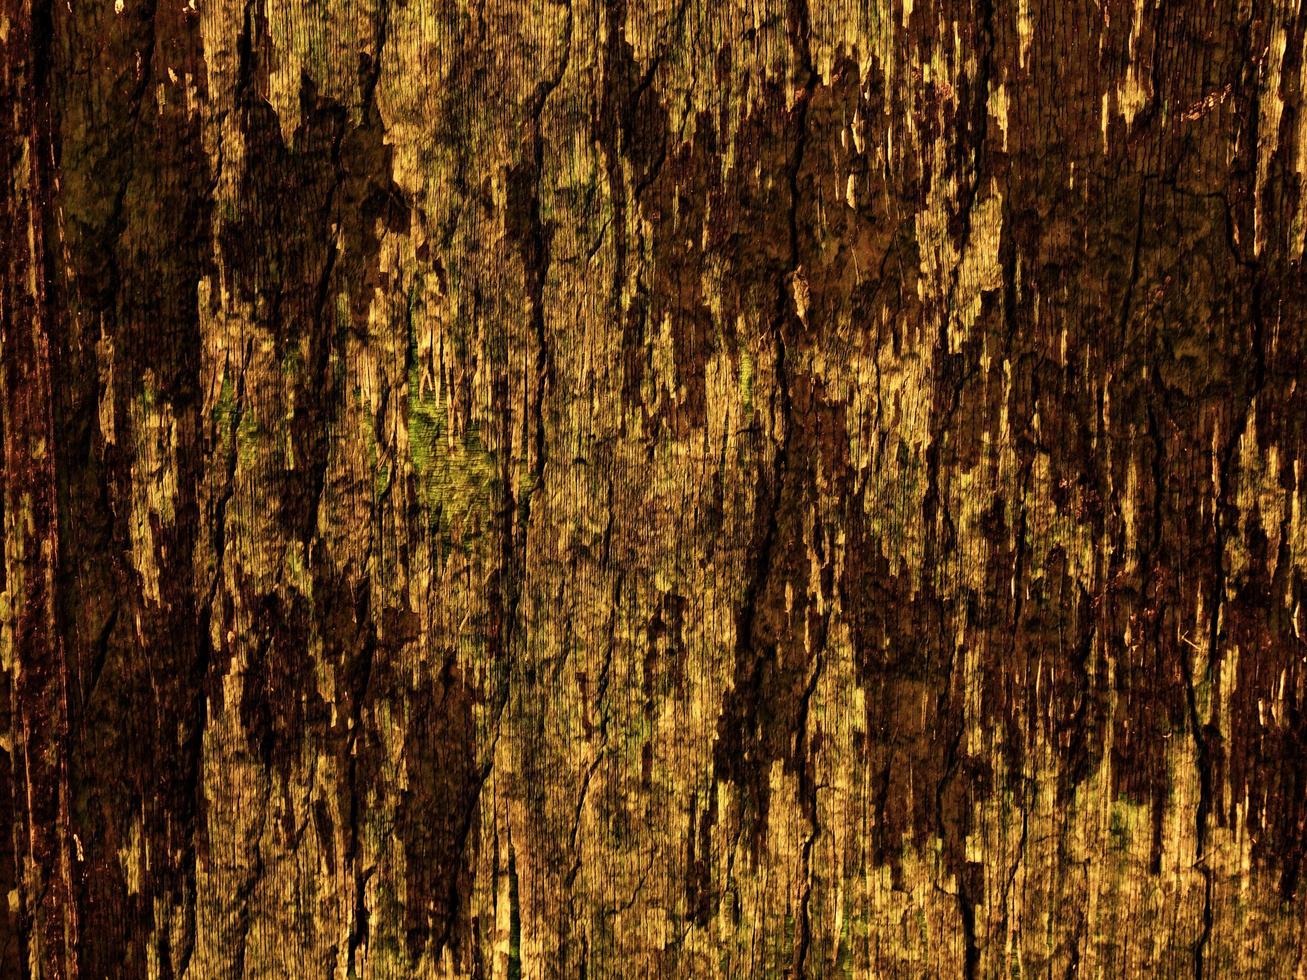 Close-up of tree bark for background or texture photo